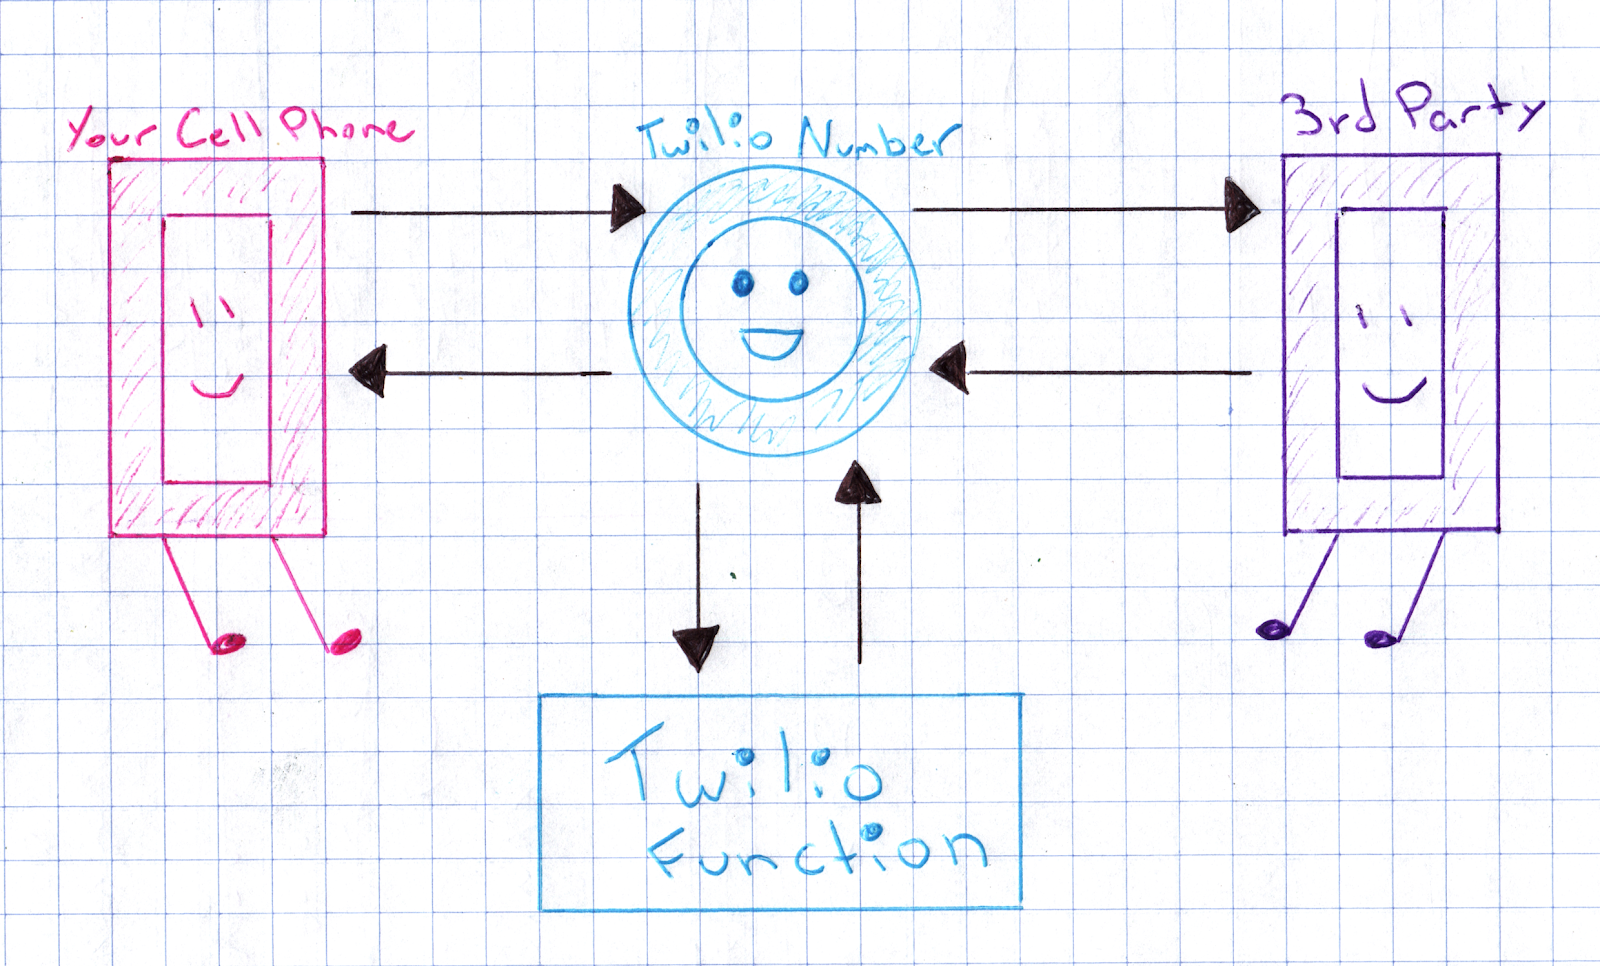 A hand-drawn diagram. On the left, a pink anthrophomorphic cell phone labeled "Your Cell Phone." In the middle, a smiling blue circle labeled "Twilio Number." Underneath that, a blue box labeled "Twilio Function." On the right, a purple anthrophomorphic cell phone labeled "3rd Party." There are arrows flowing from Your Cell Phone to/from Twilio Number, from Twilio Number to/from Twilio Function, and from Twilio Number to/from 3rd Party.